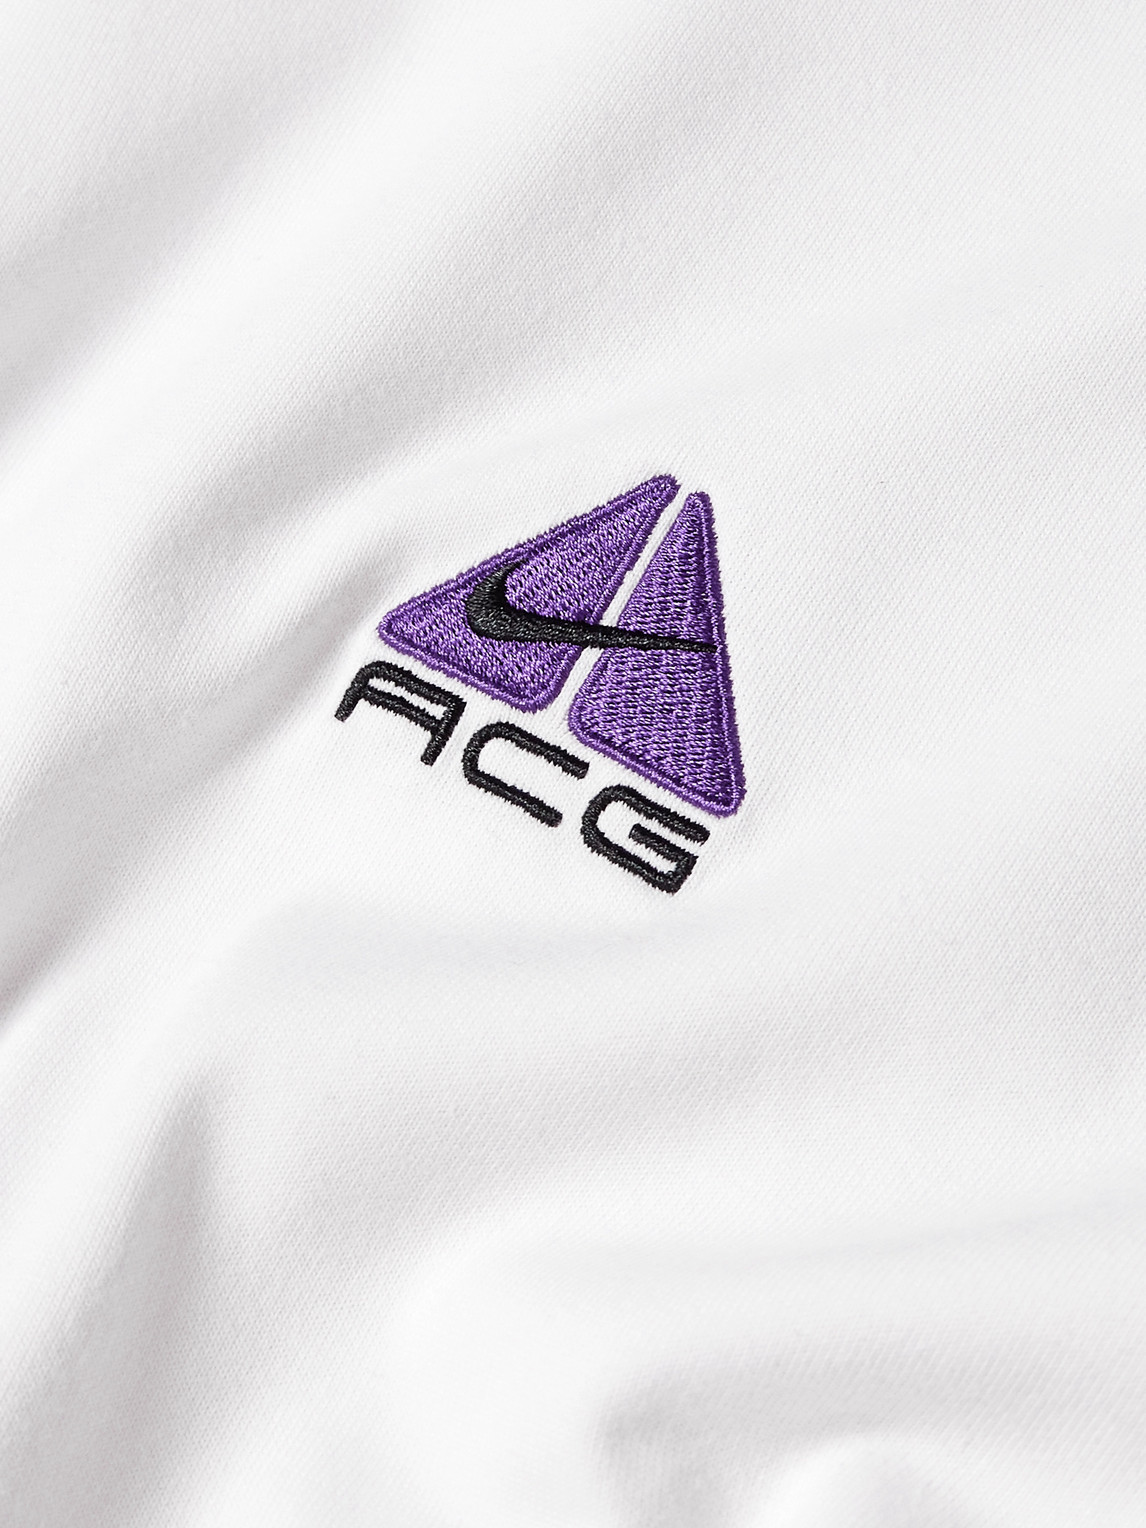 Shop Nike Acg Logo-embroidered Jersey T-shirt In White